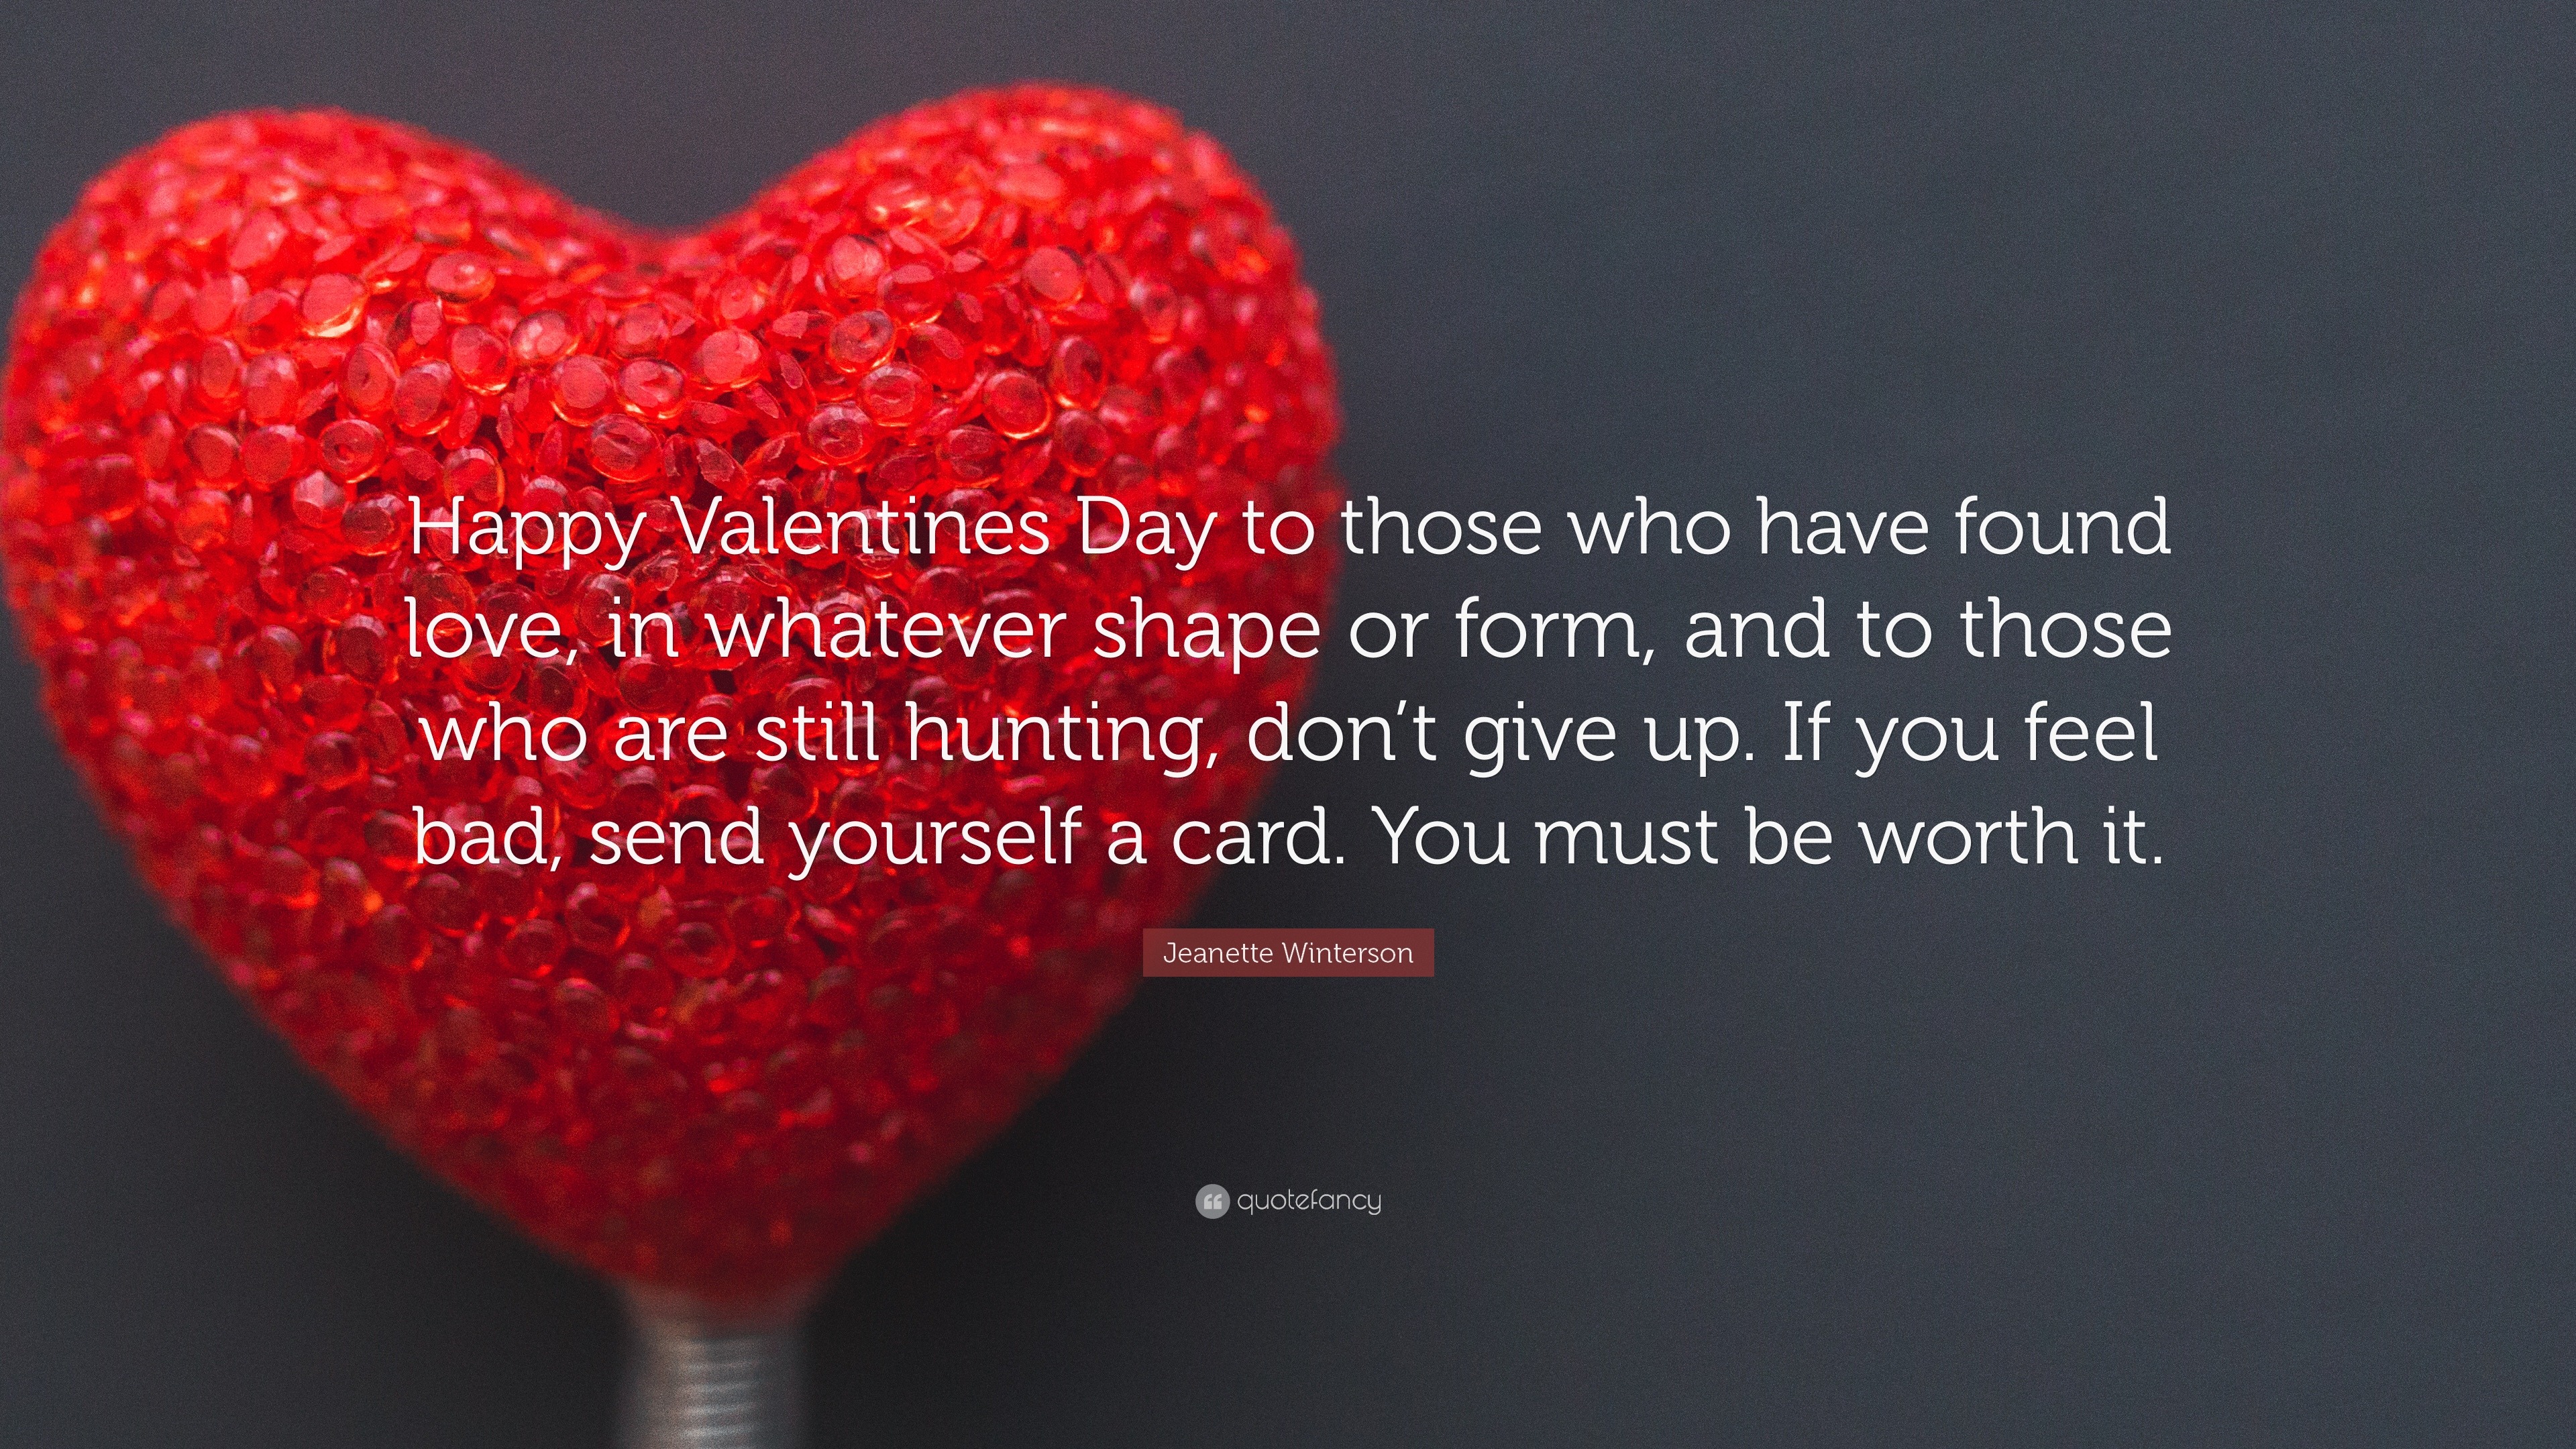 38575 Jeanette Winterson Quote Happy Valentines Day To Those Who Have 